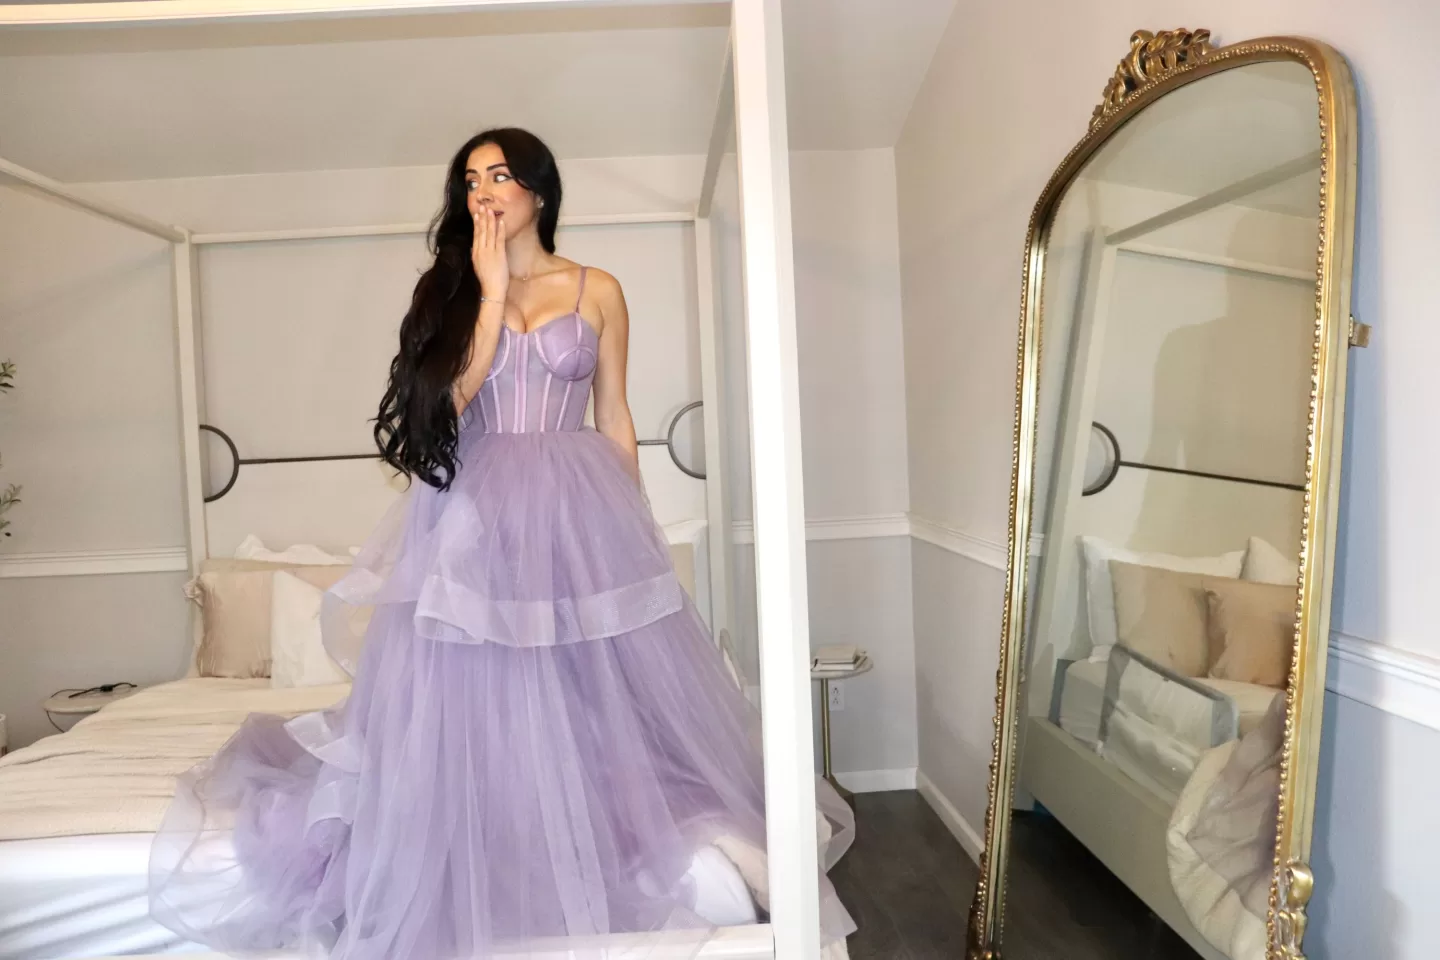 woman with long hair wearing a purple princess gown